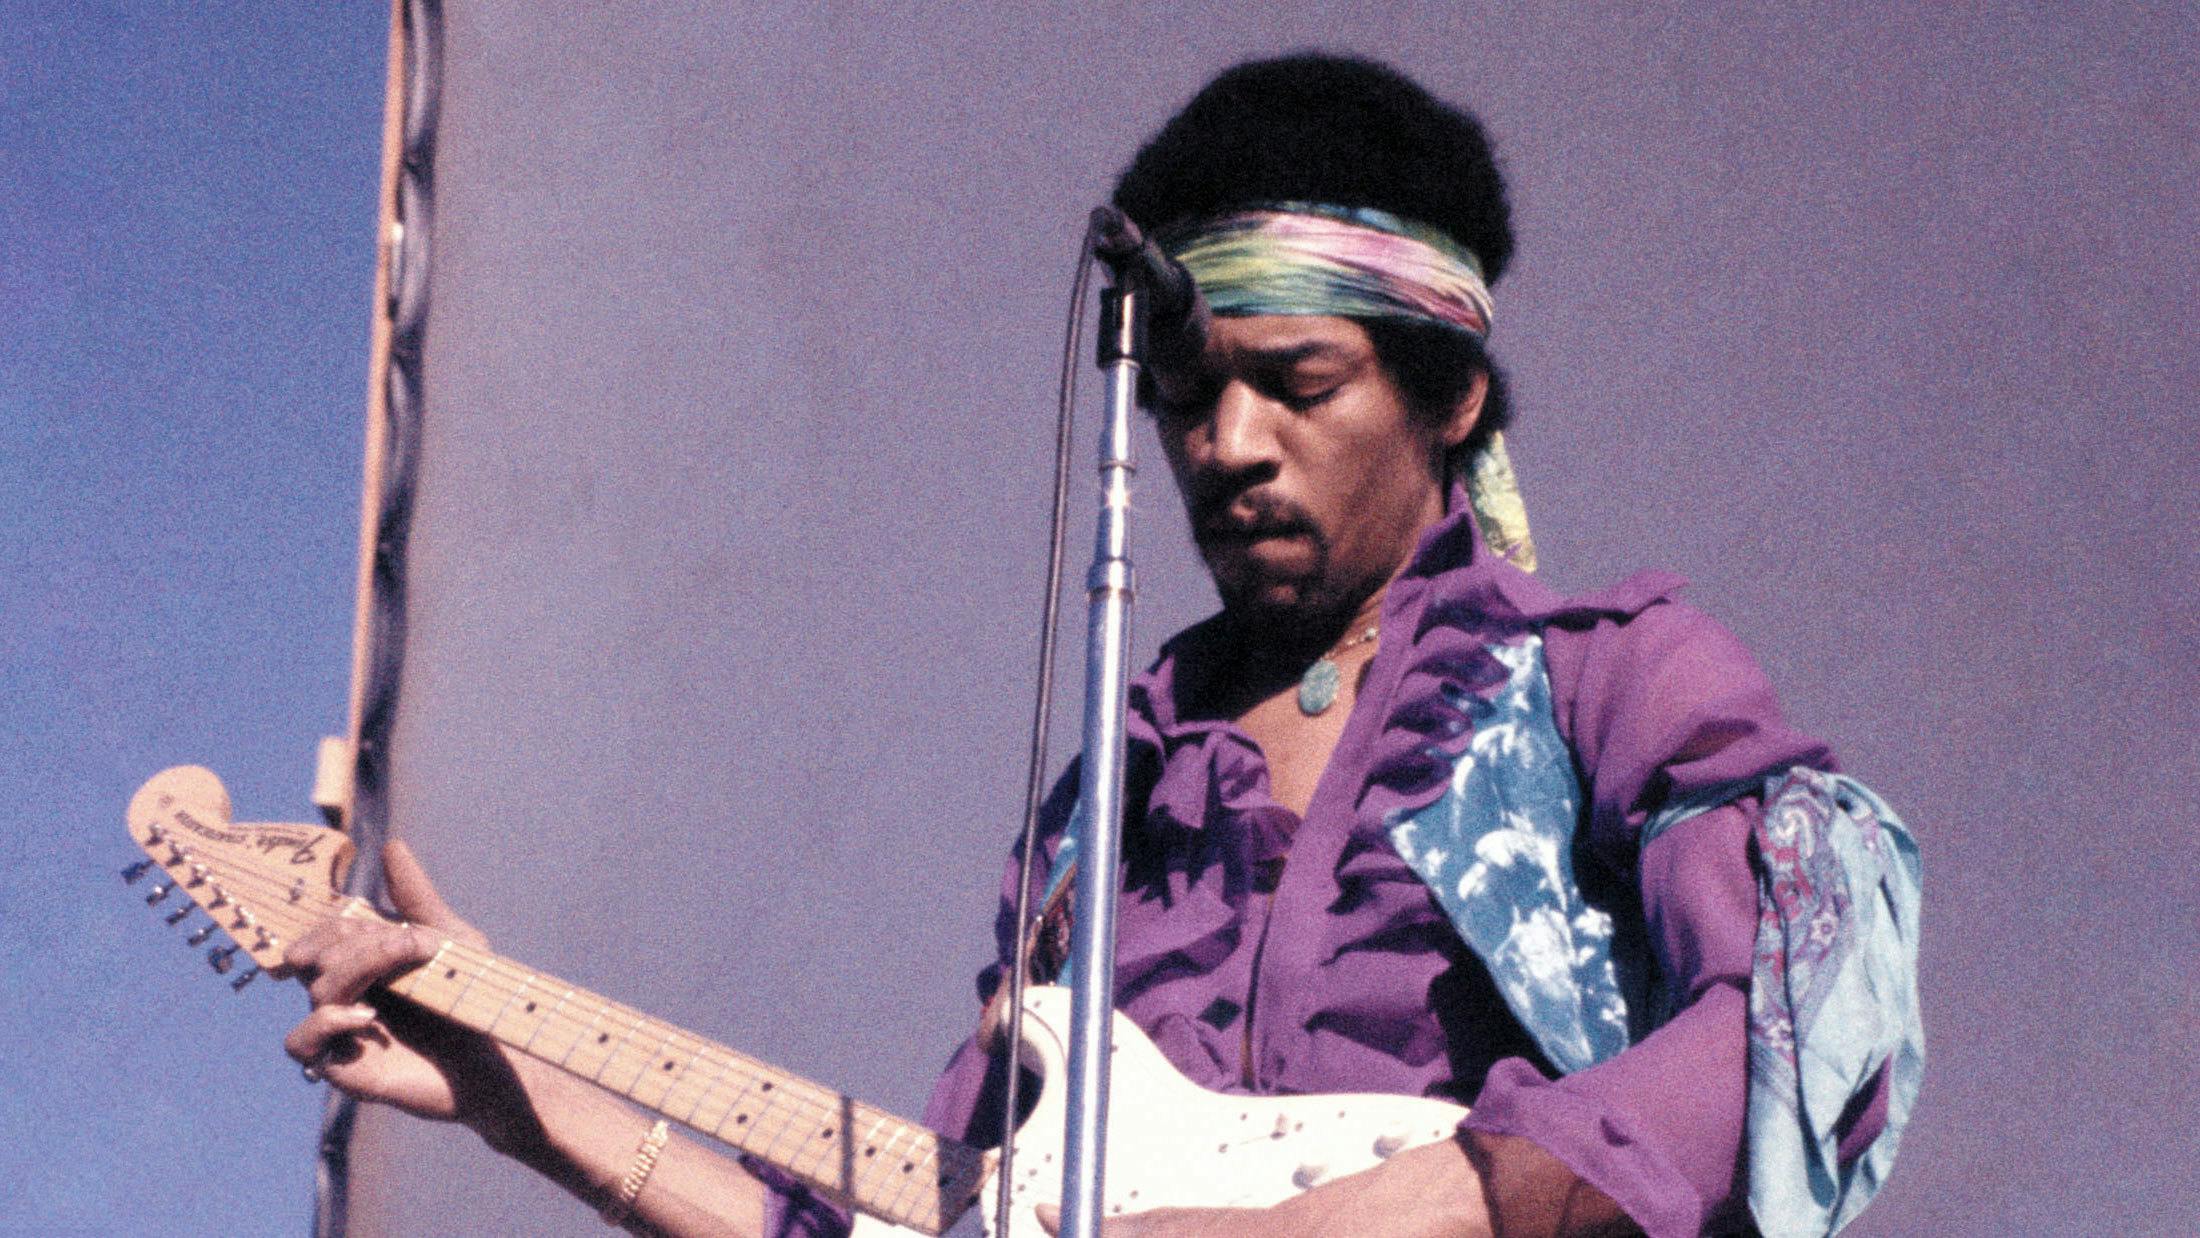 "His impact is beyond solar systems": Remembering Jimi Hendrix, the greatest guitarist who ever lived